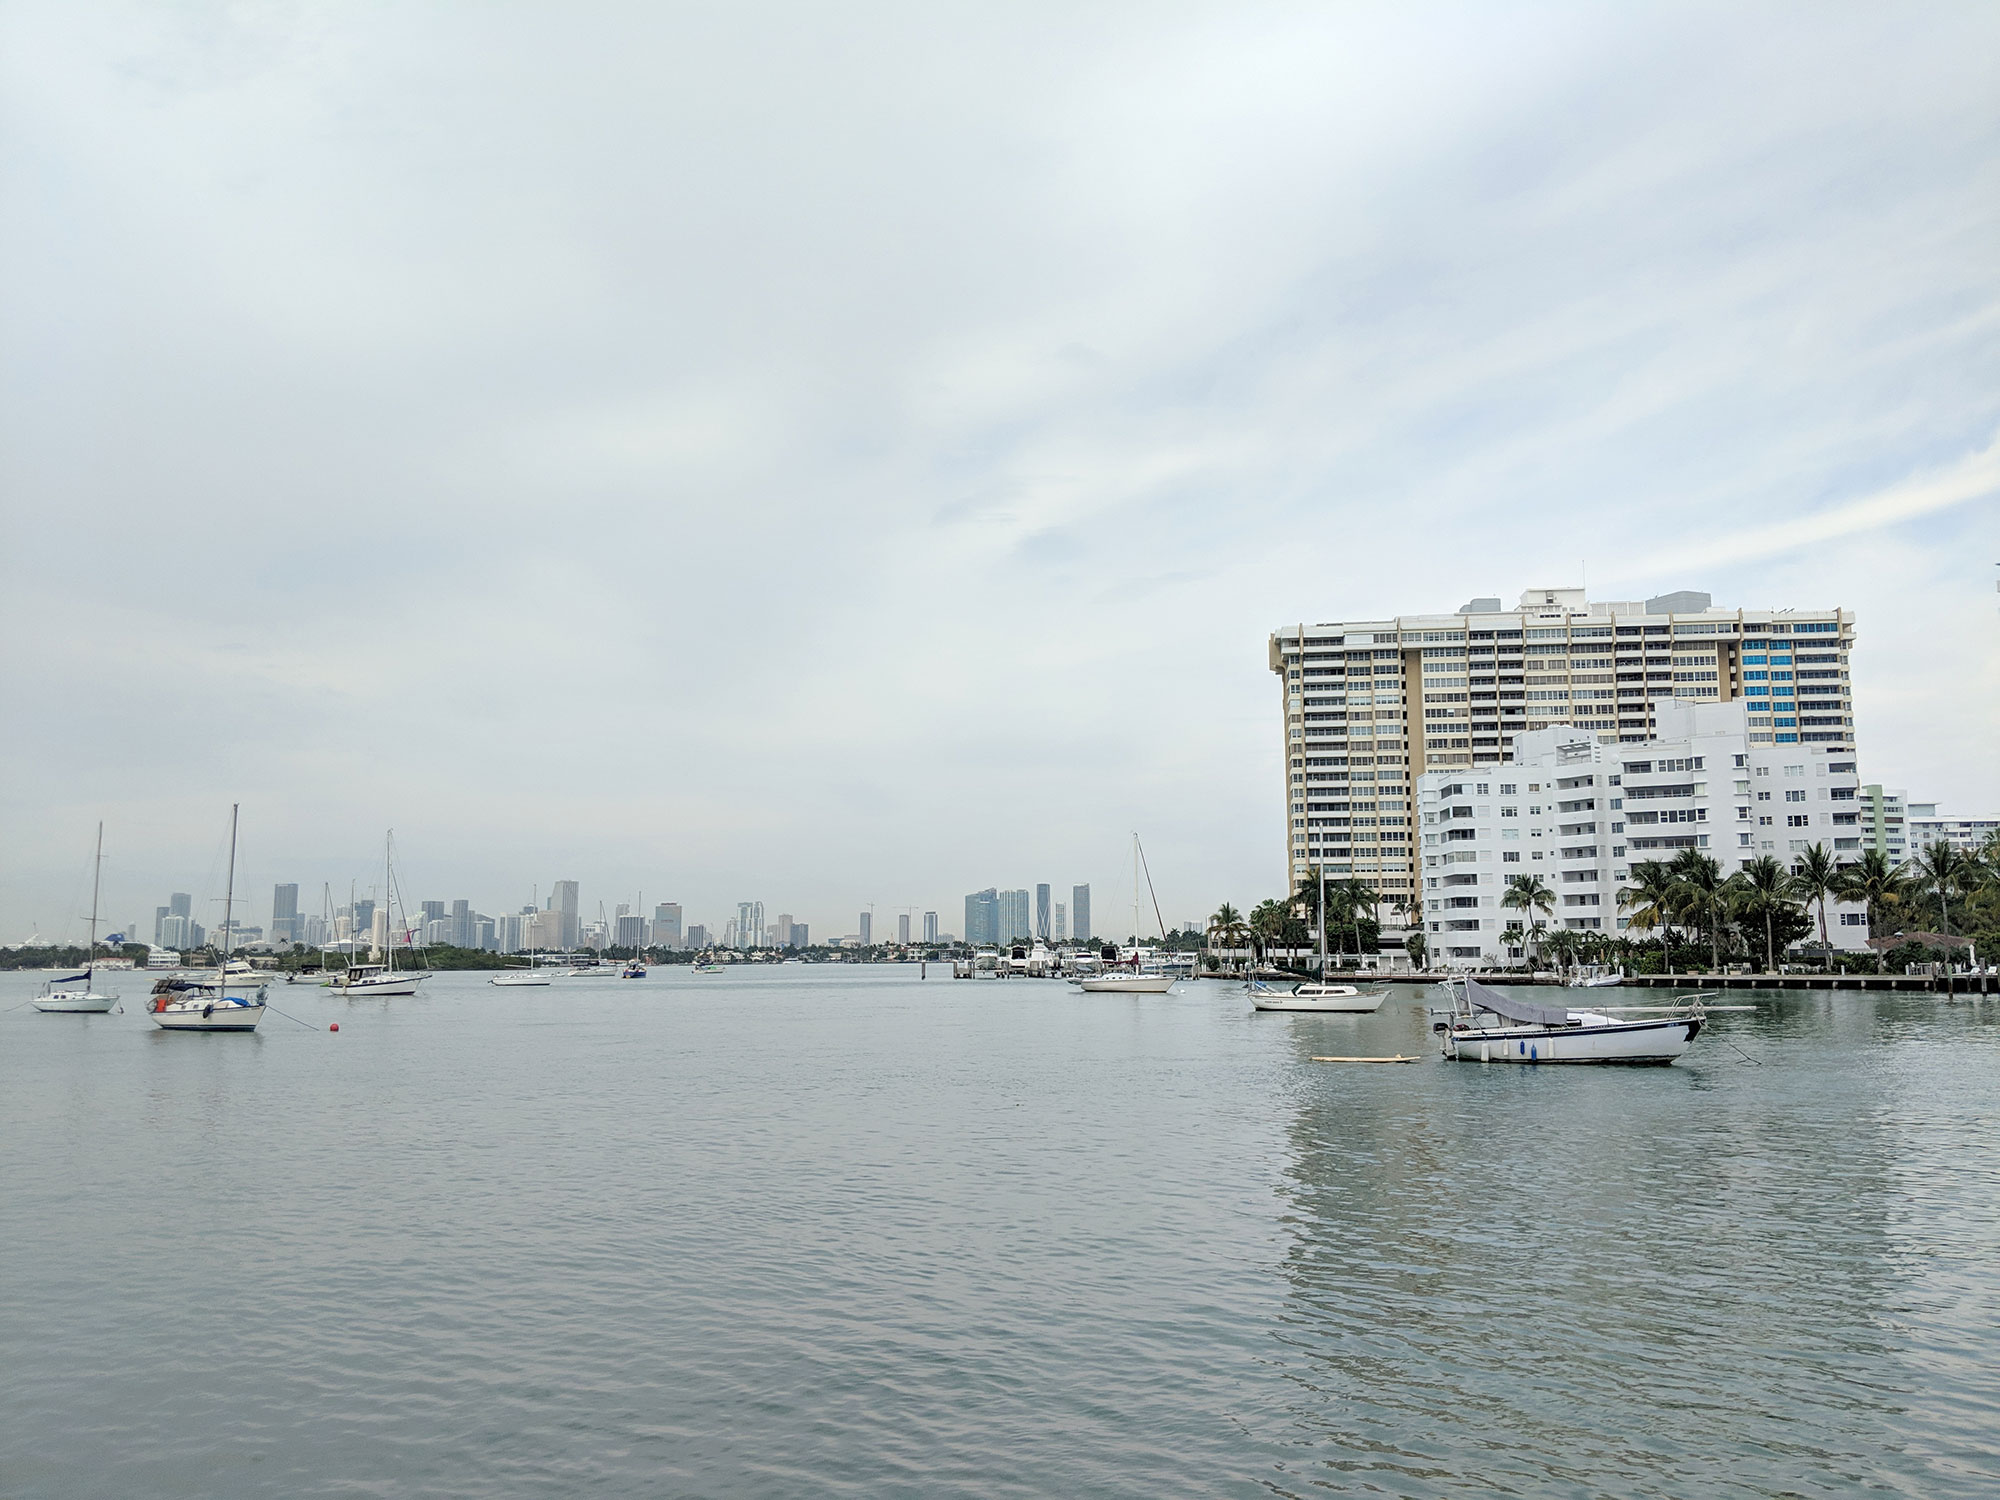 Condos on Biscayne Bay in Miami.